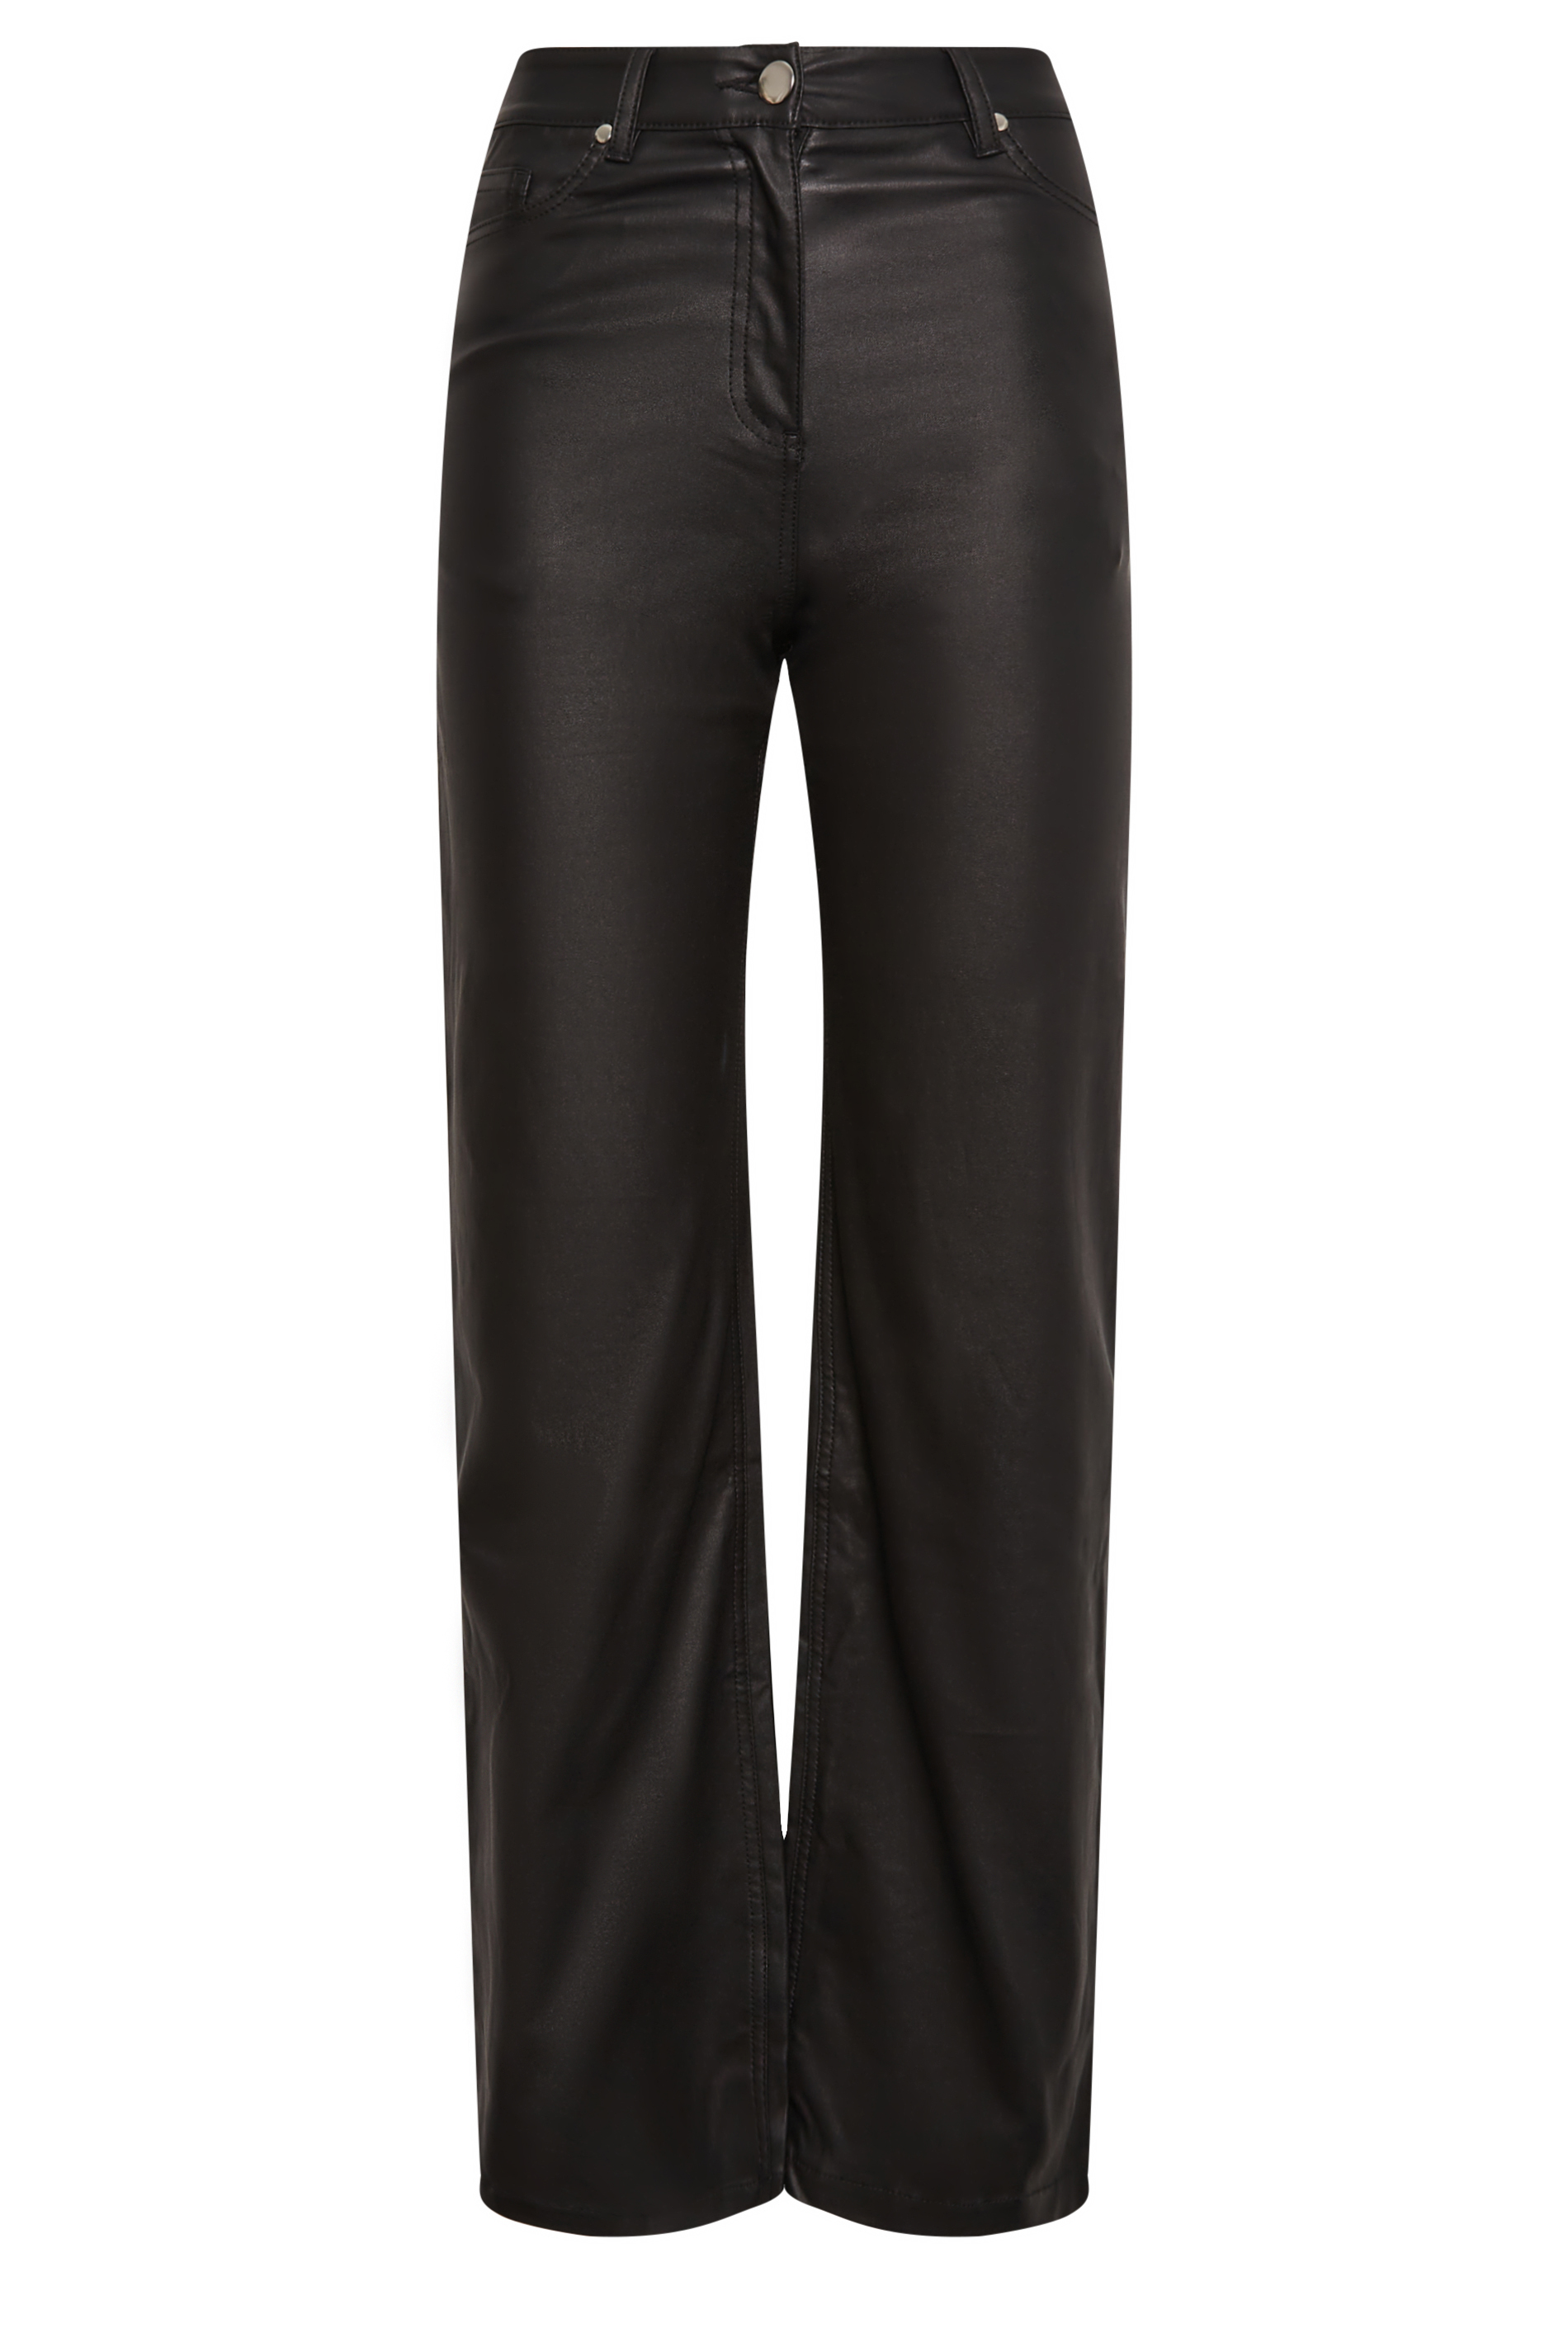 LTS Tall Black Faux Leather Wide Leg Trousers | Long Tall Sally